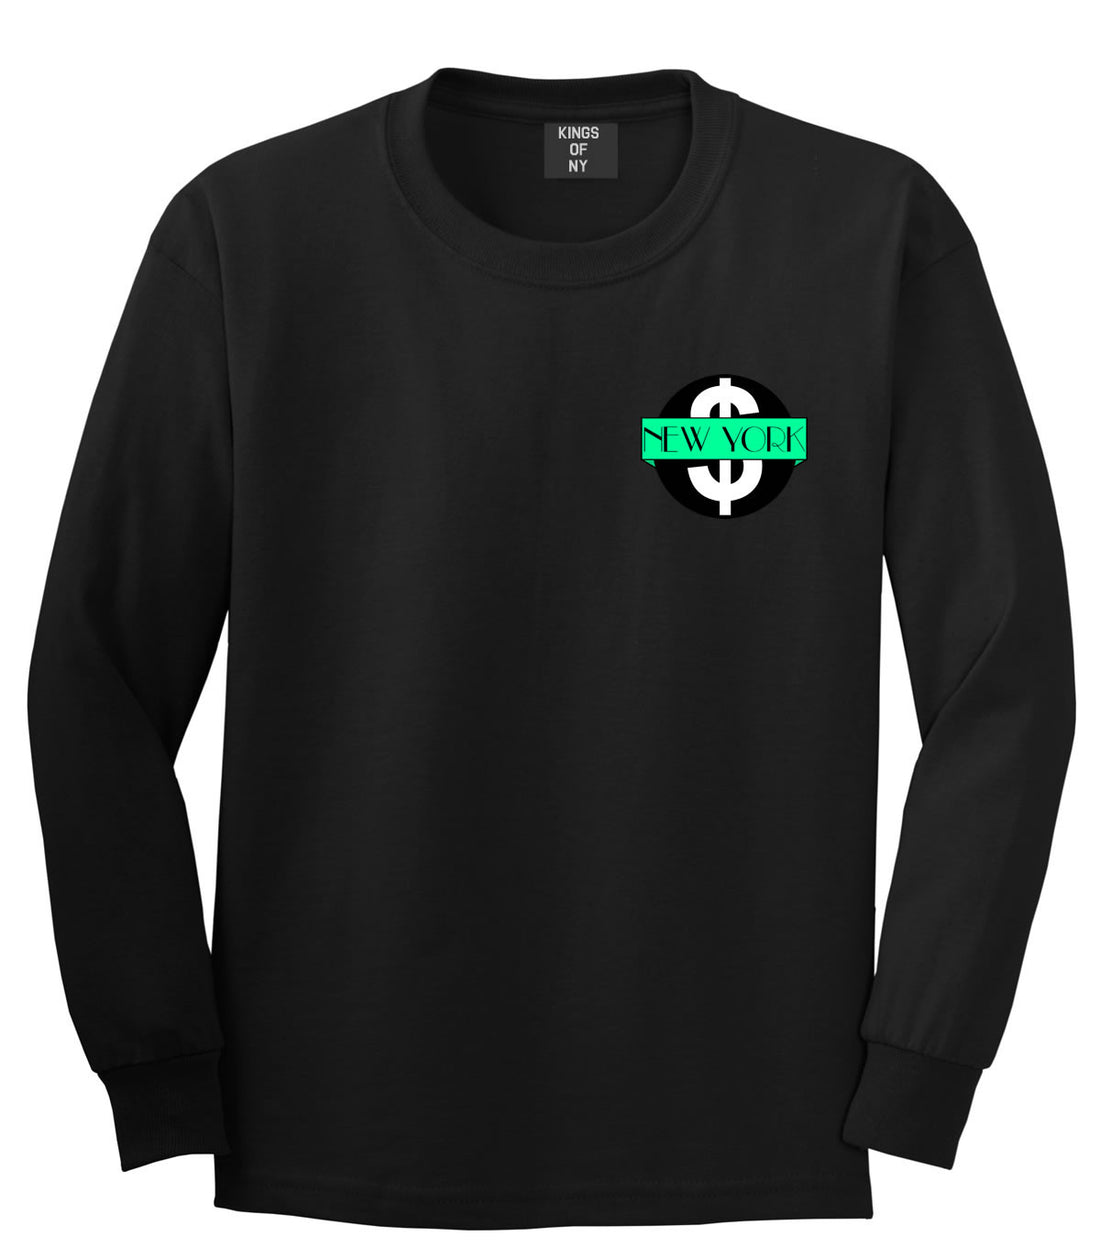 New York Mint Chest Logo Long Sleeve T-Shirt in Black By Kings Of NY